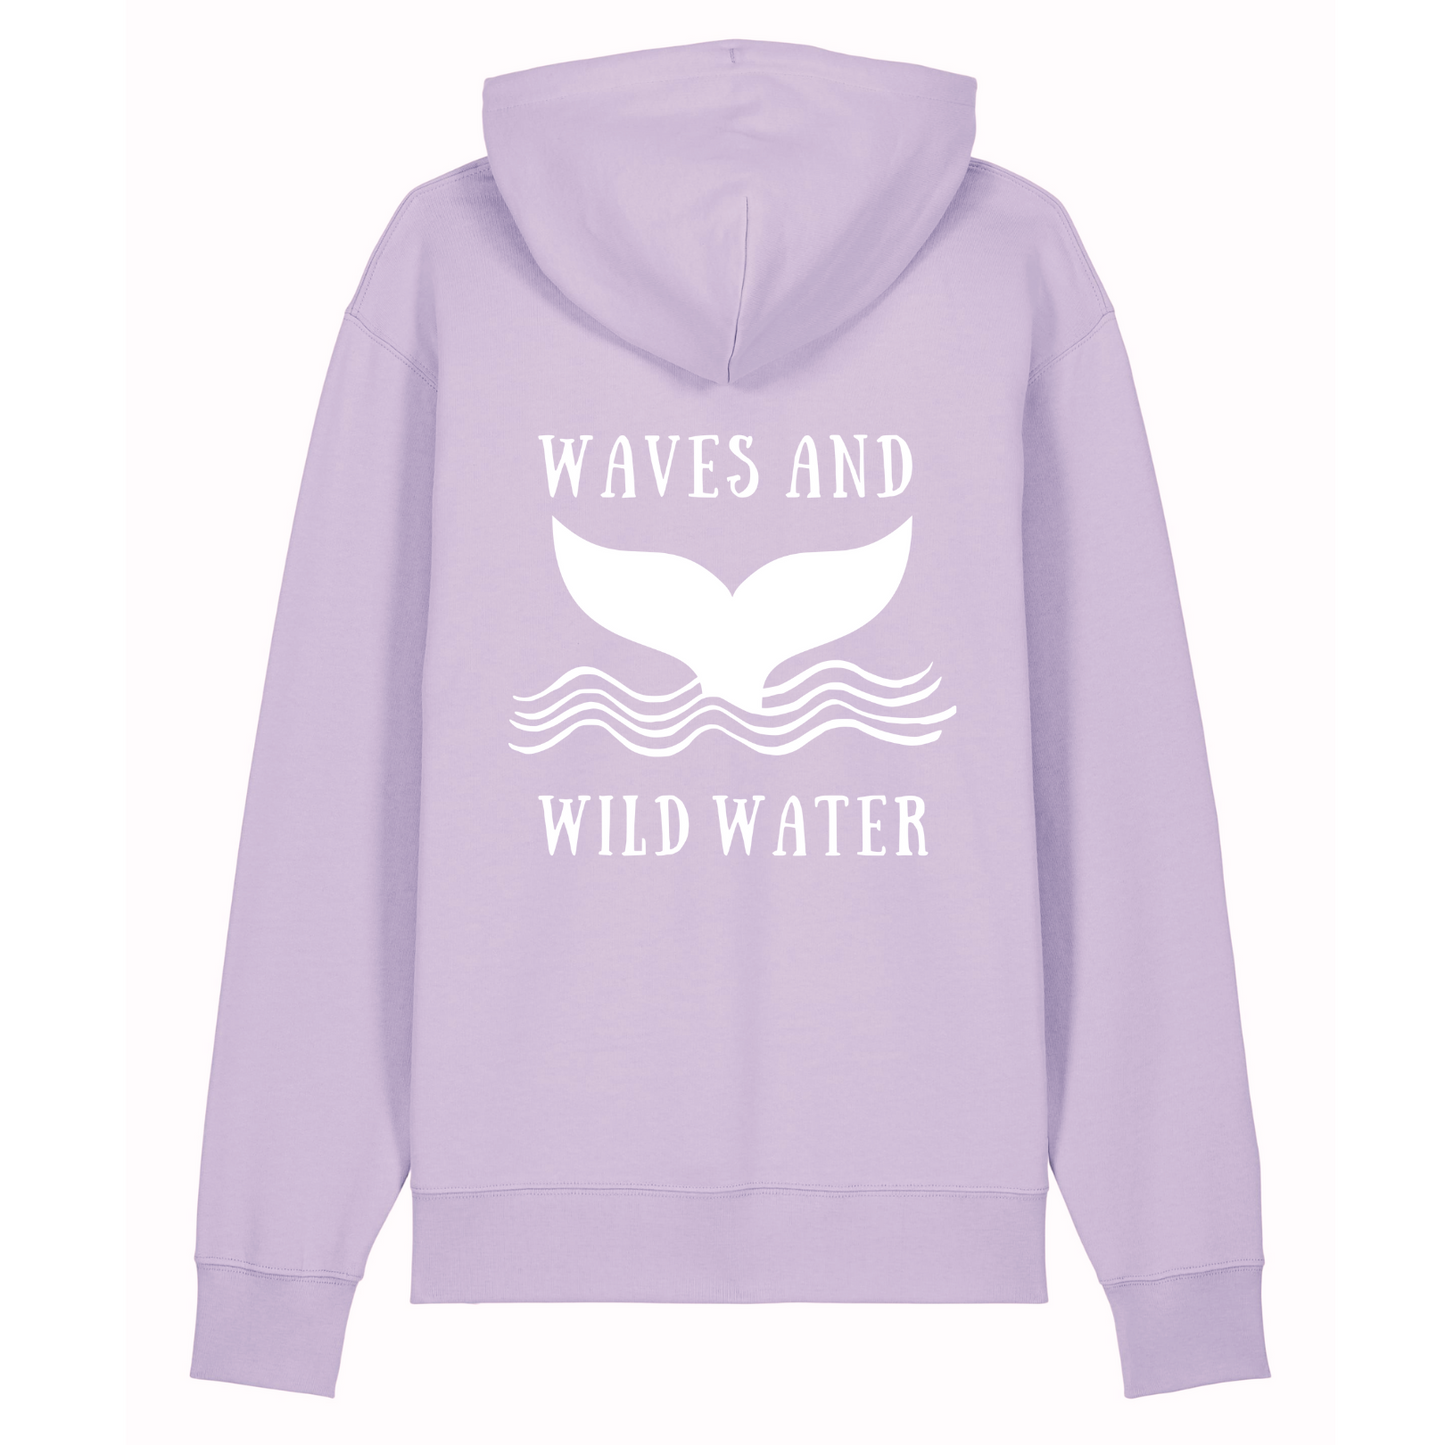 The beautiful lavender shade of this Beach Hut Hoodie compliments the white hand printed Waves and Wild Water logo perfectly. The logo depicts a large whale tail emerging from the waves, making this hoodie a great gift for any wild swimmer looking for something a little different.